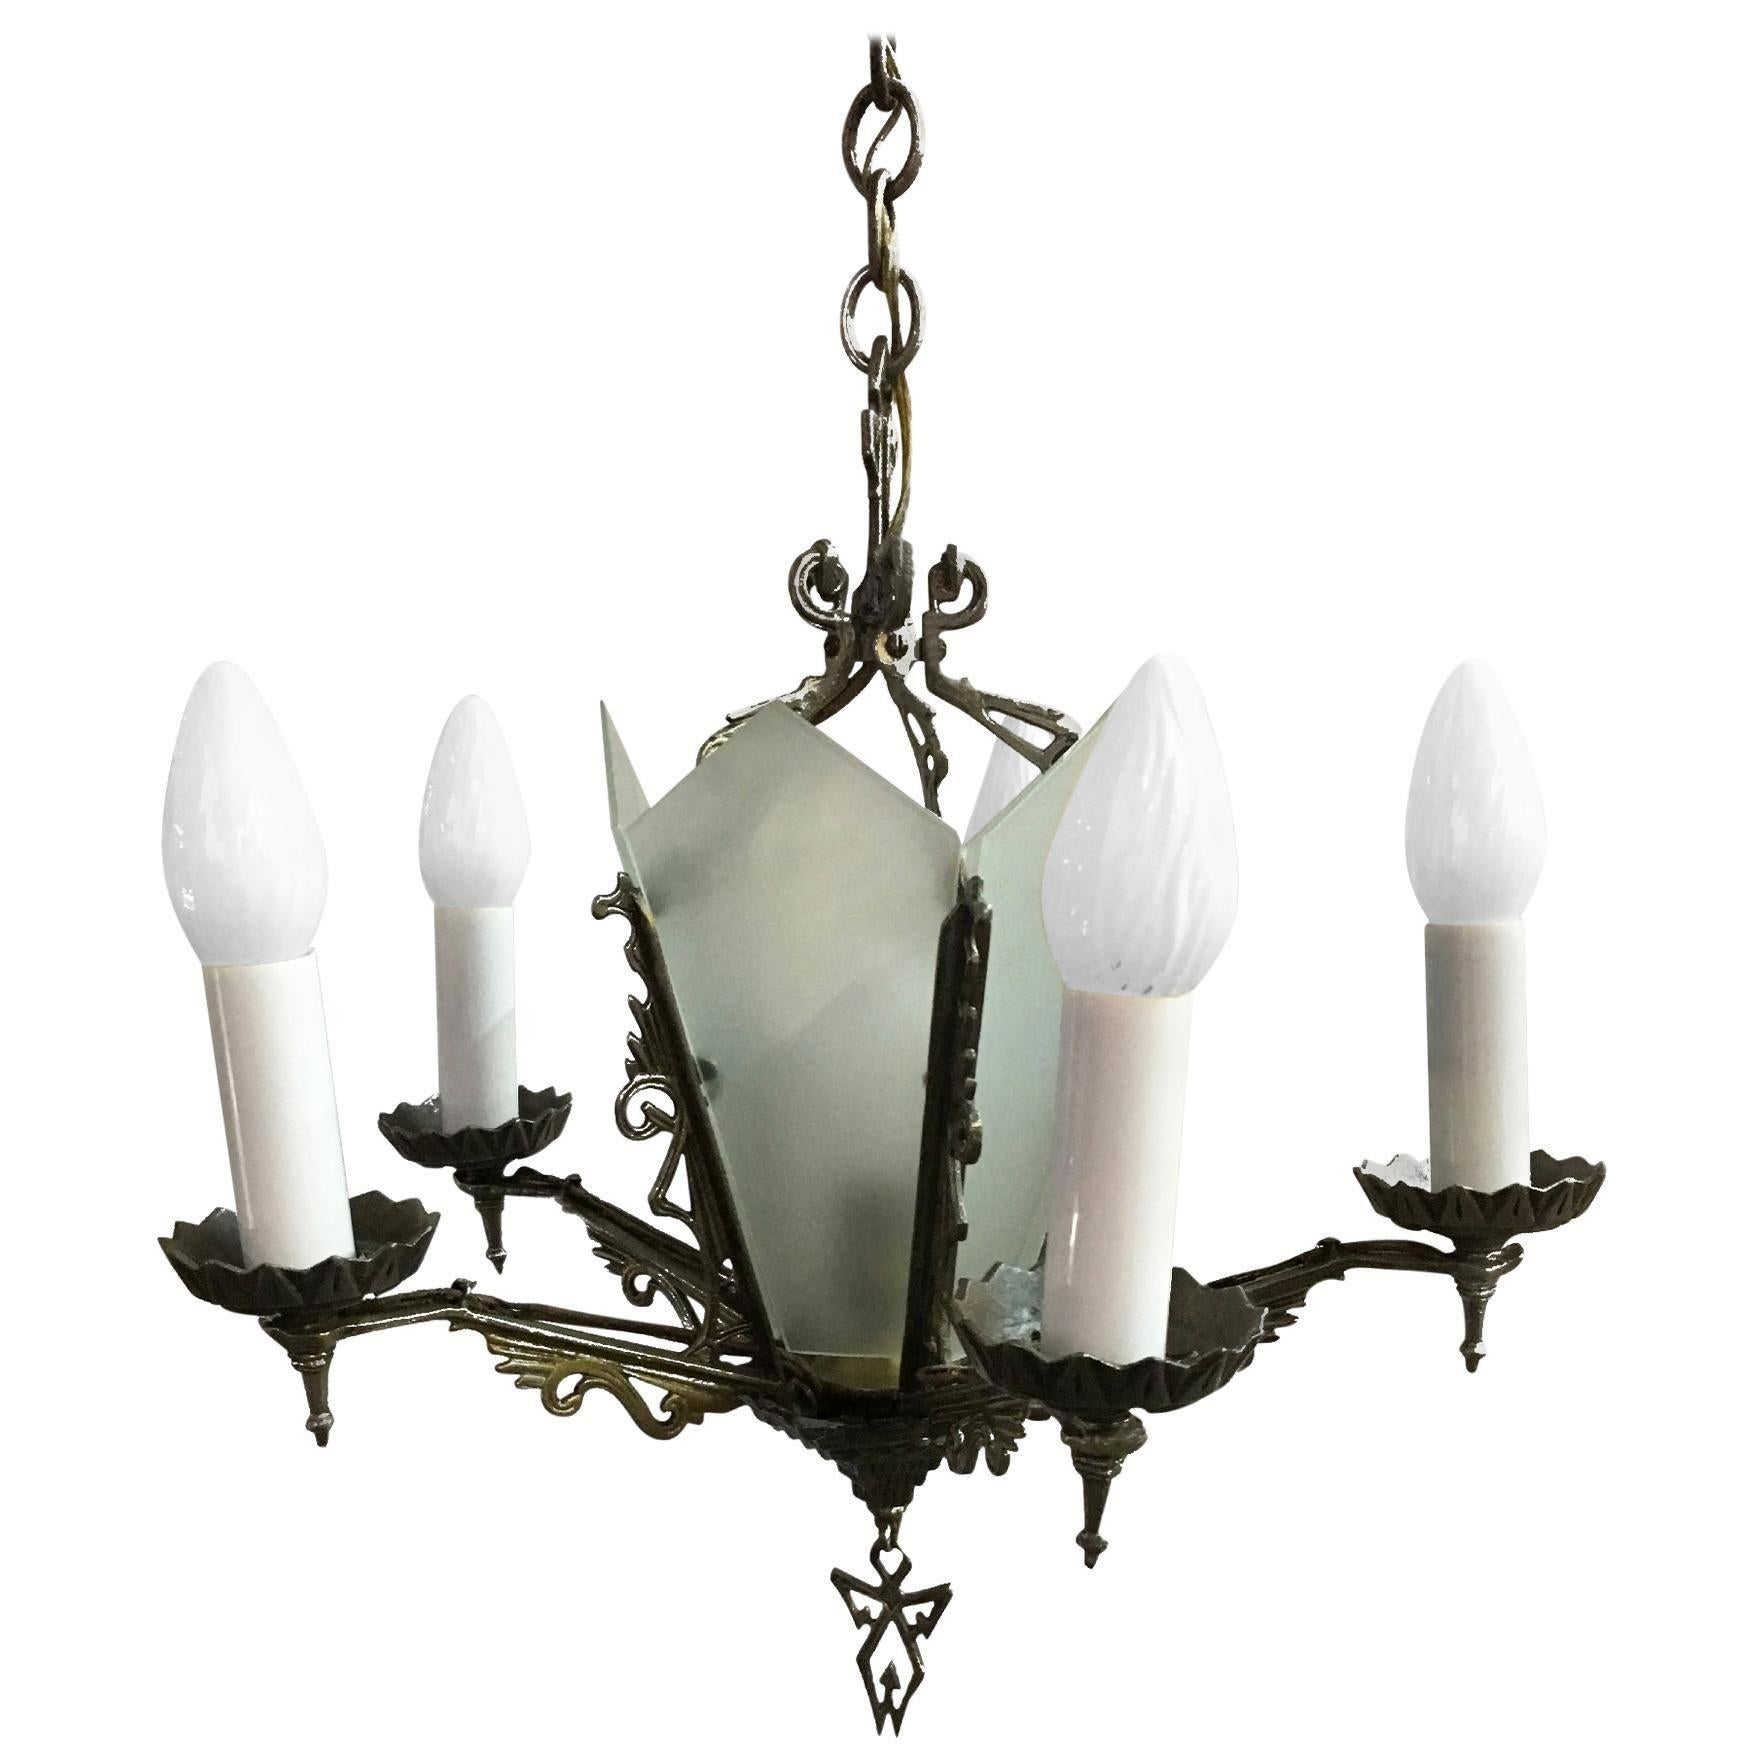 Five-arm geometric Art Deco chandelier with candle-style lights and a light-up slat glass center. The piece features scrolling details throughout while the base of the chandelier features a geometric pattern.

Dimensions: 20ʺH x 19ʺW × 19ʺD

United